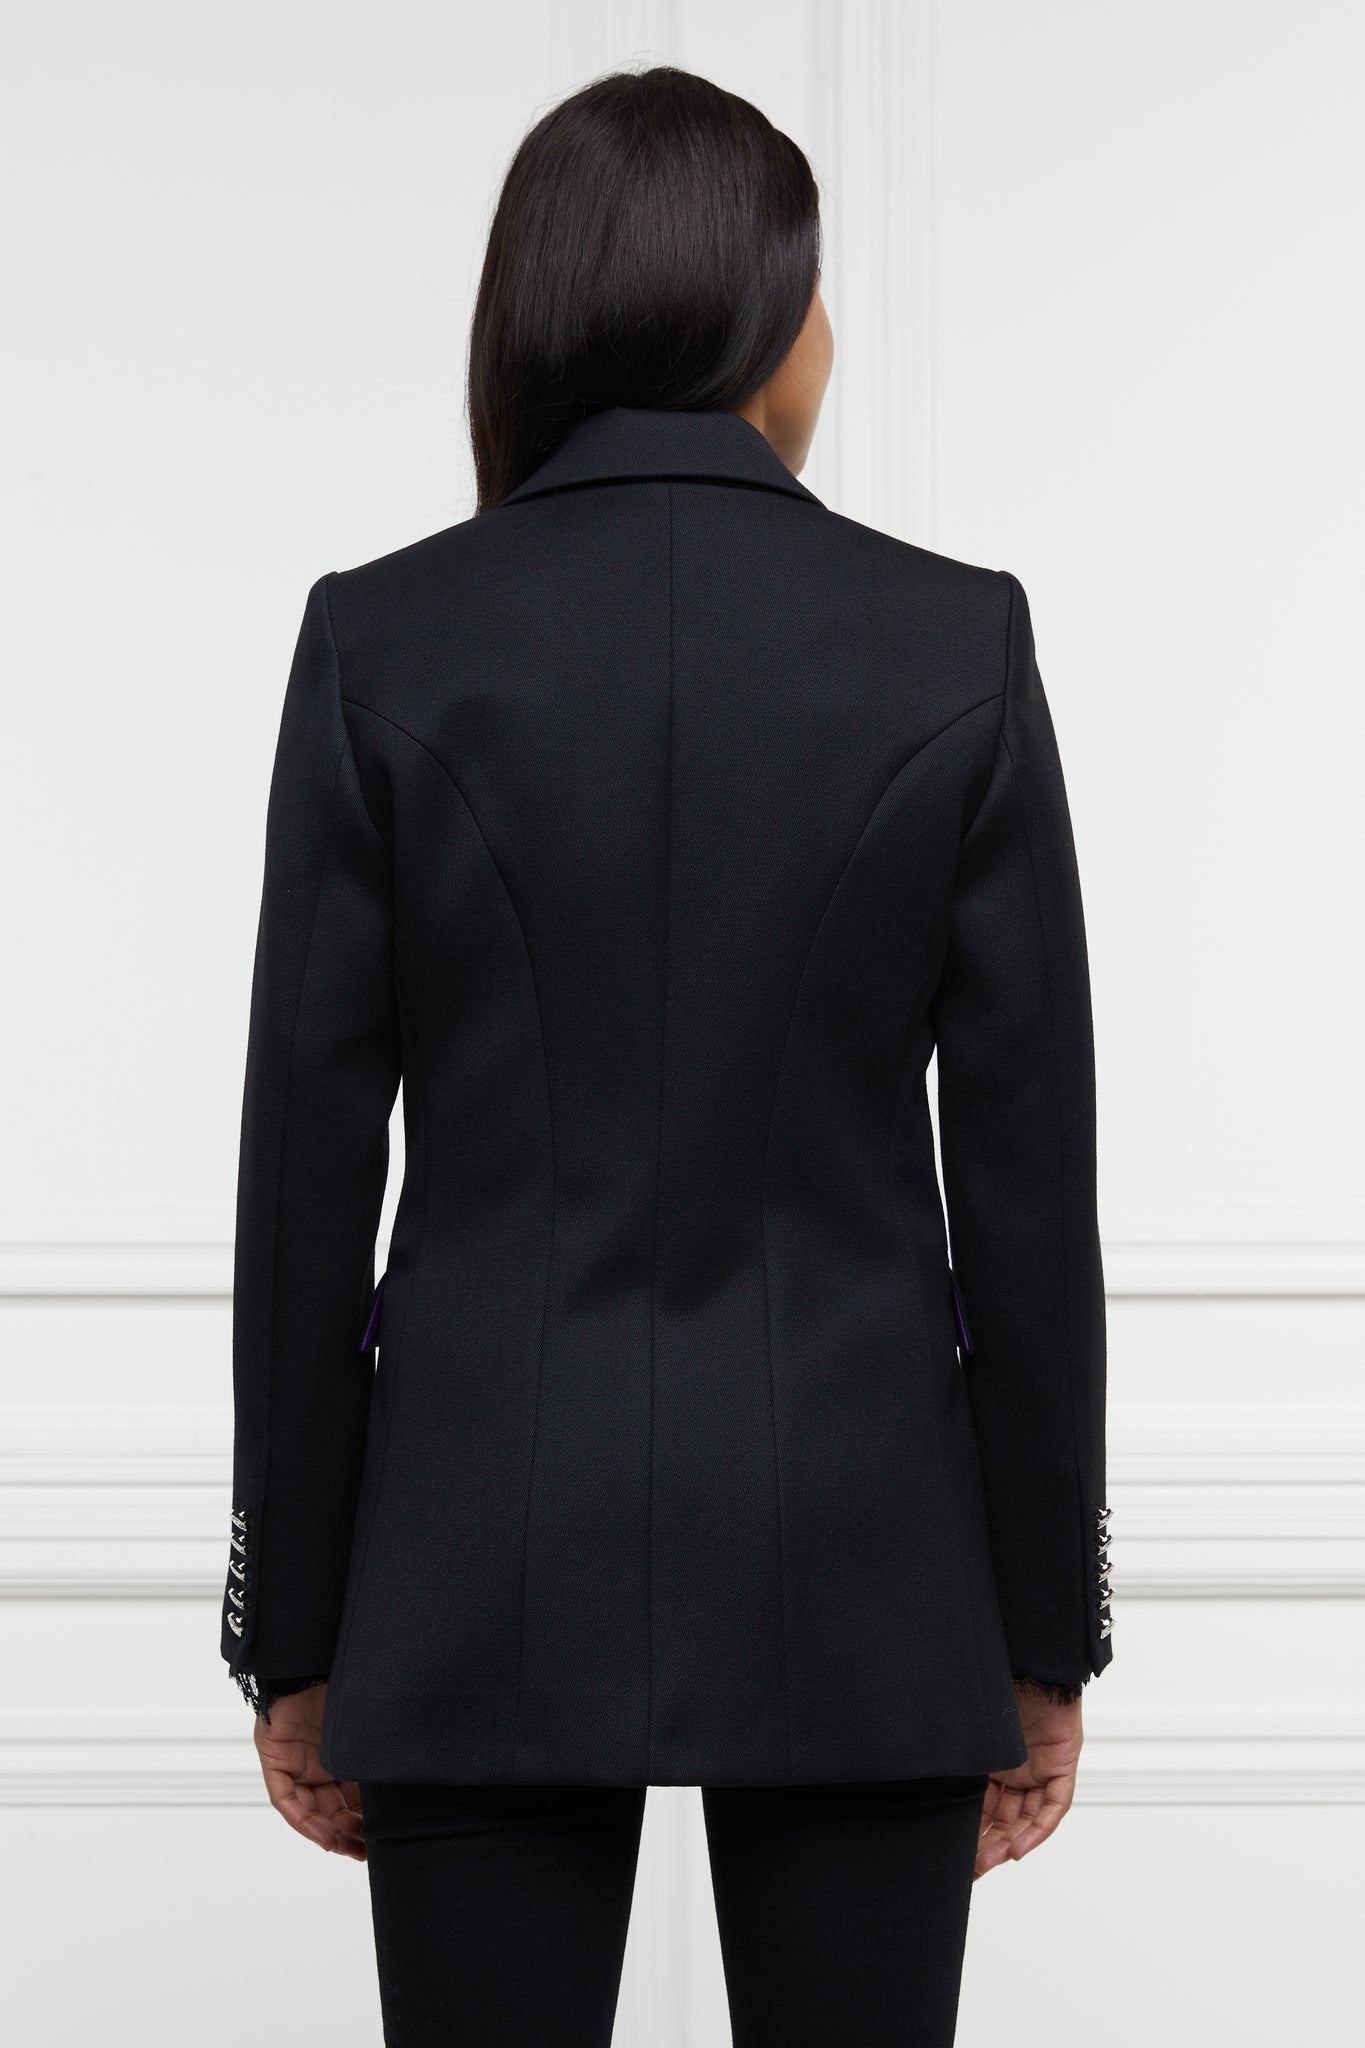 back of jubilee edition of double breasted wool blazer in black with two hip pockets and silver button details down front and on cuffs and handmade in the uk